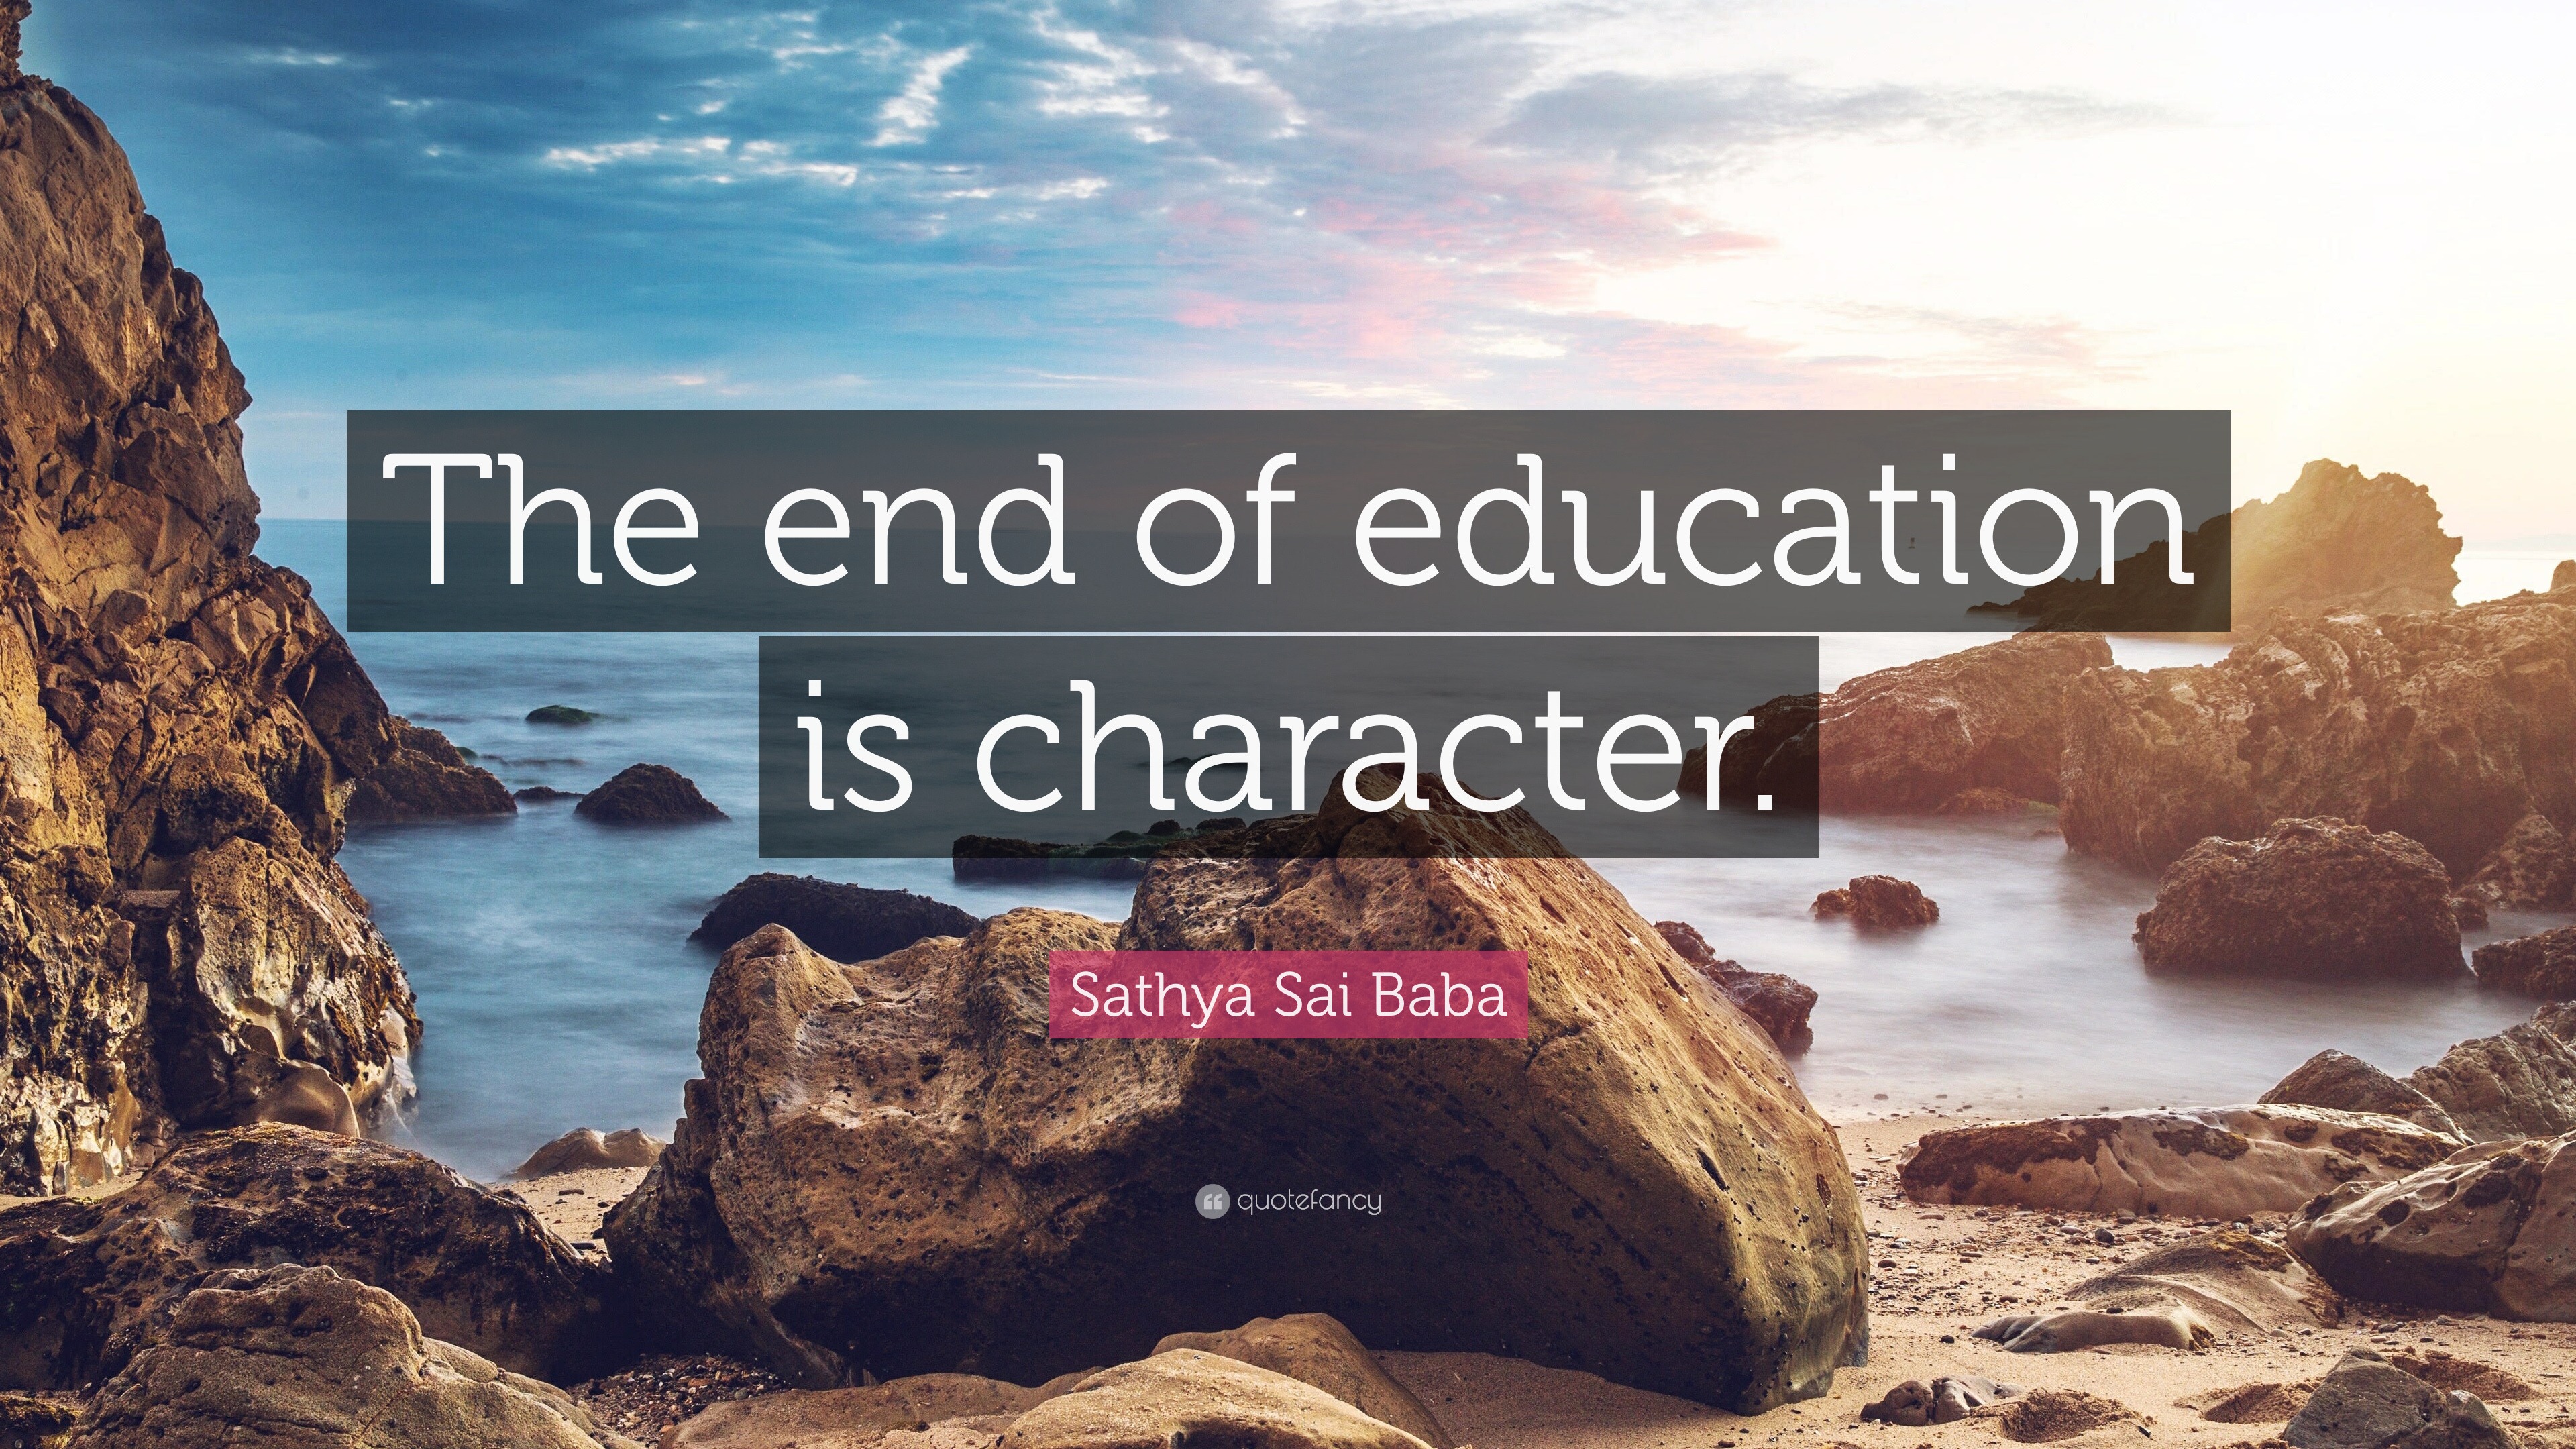 essay on end of education is character